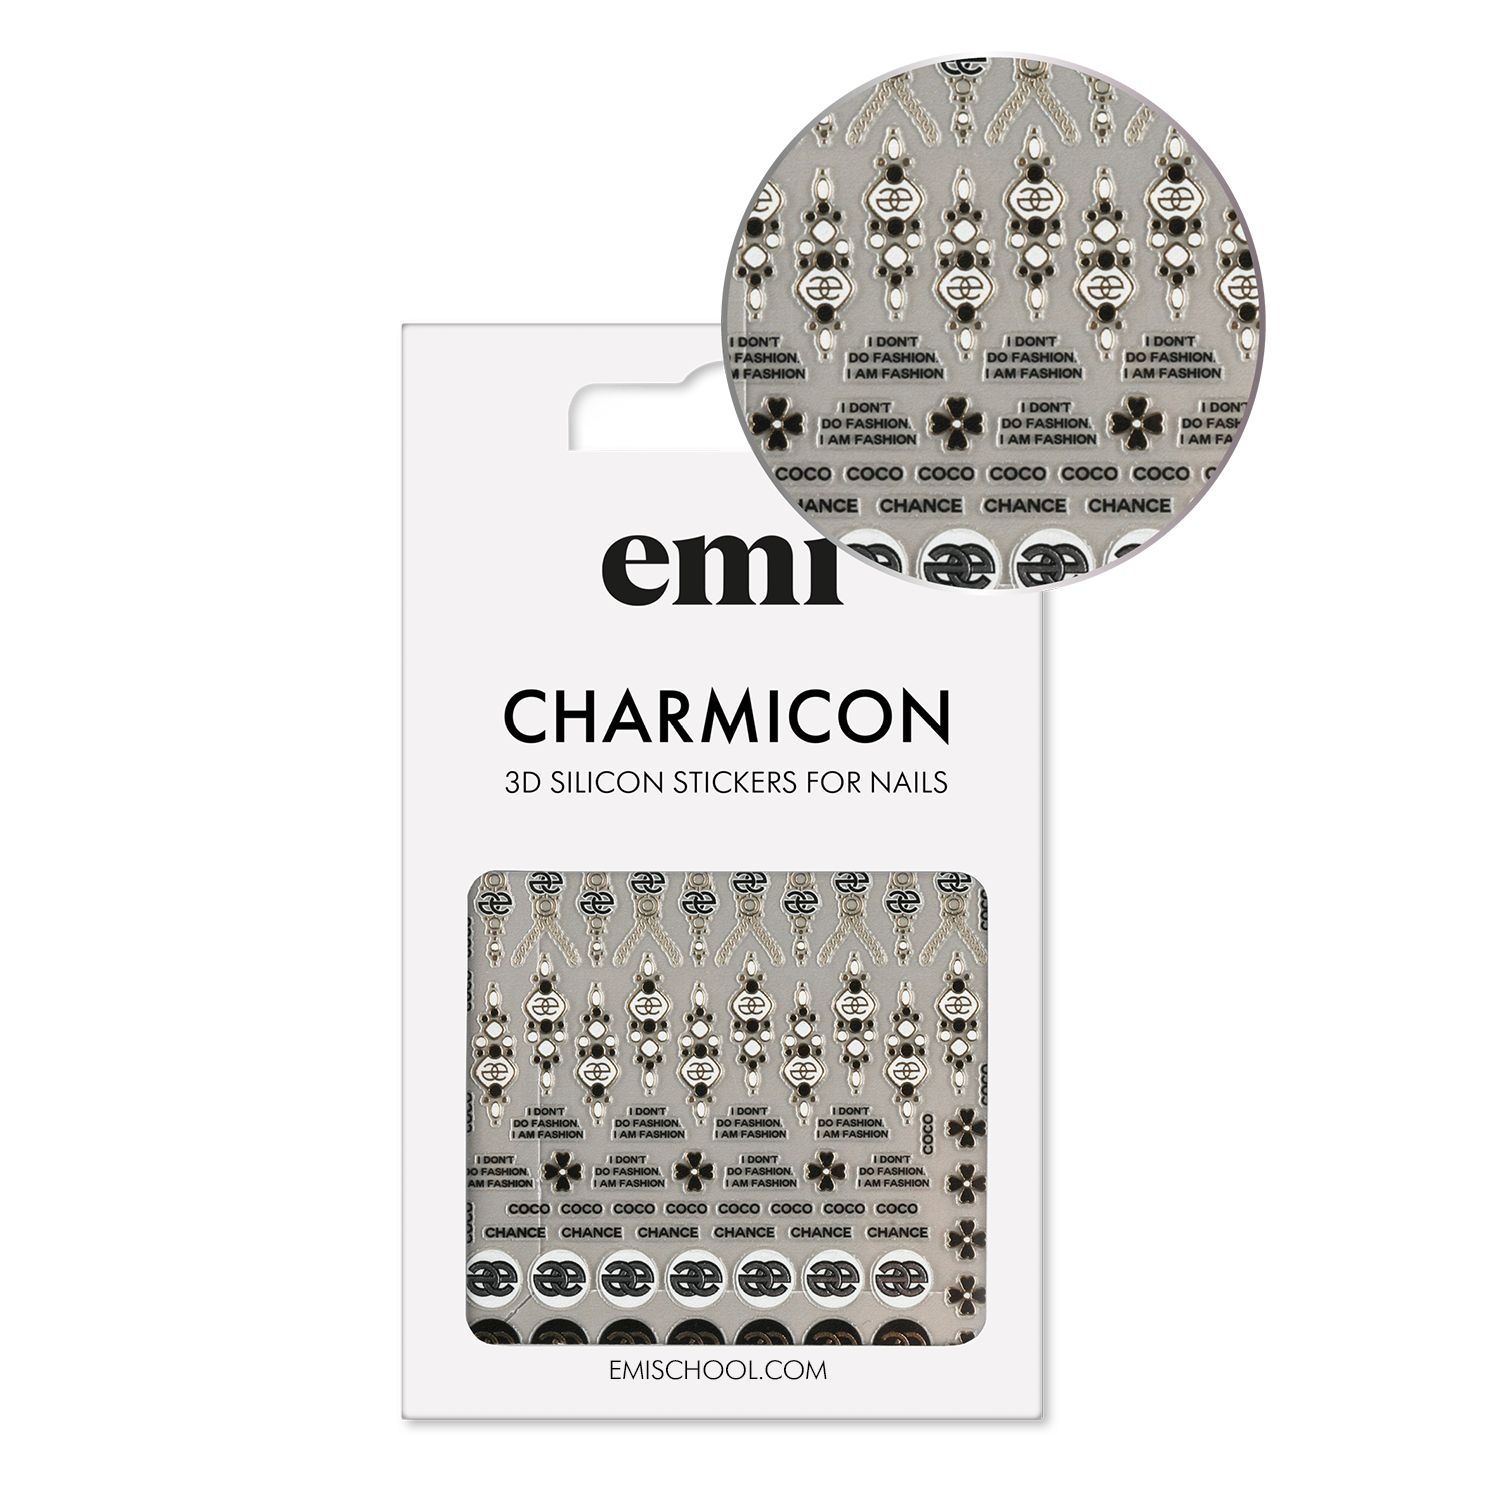 Charmicon 3D Silicone Stickers #235 Chance